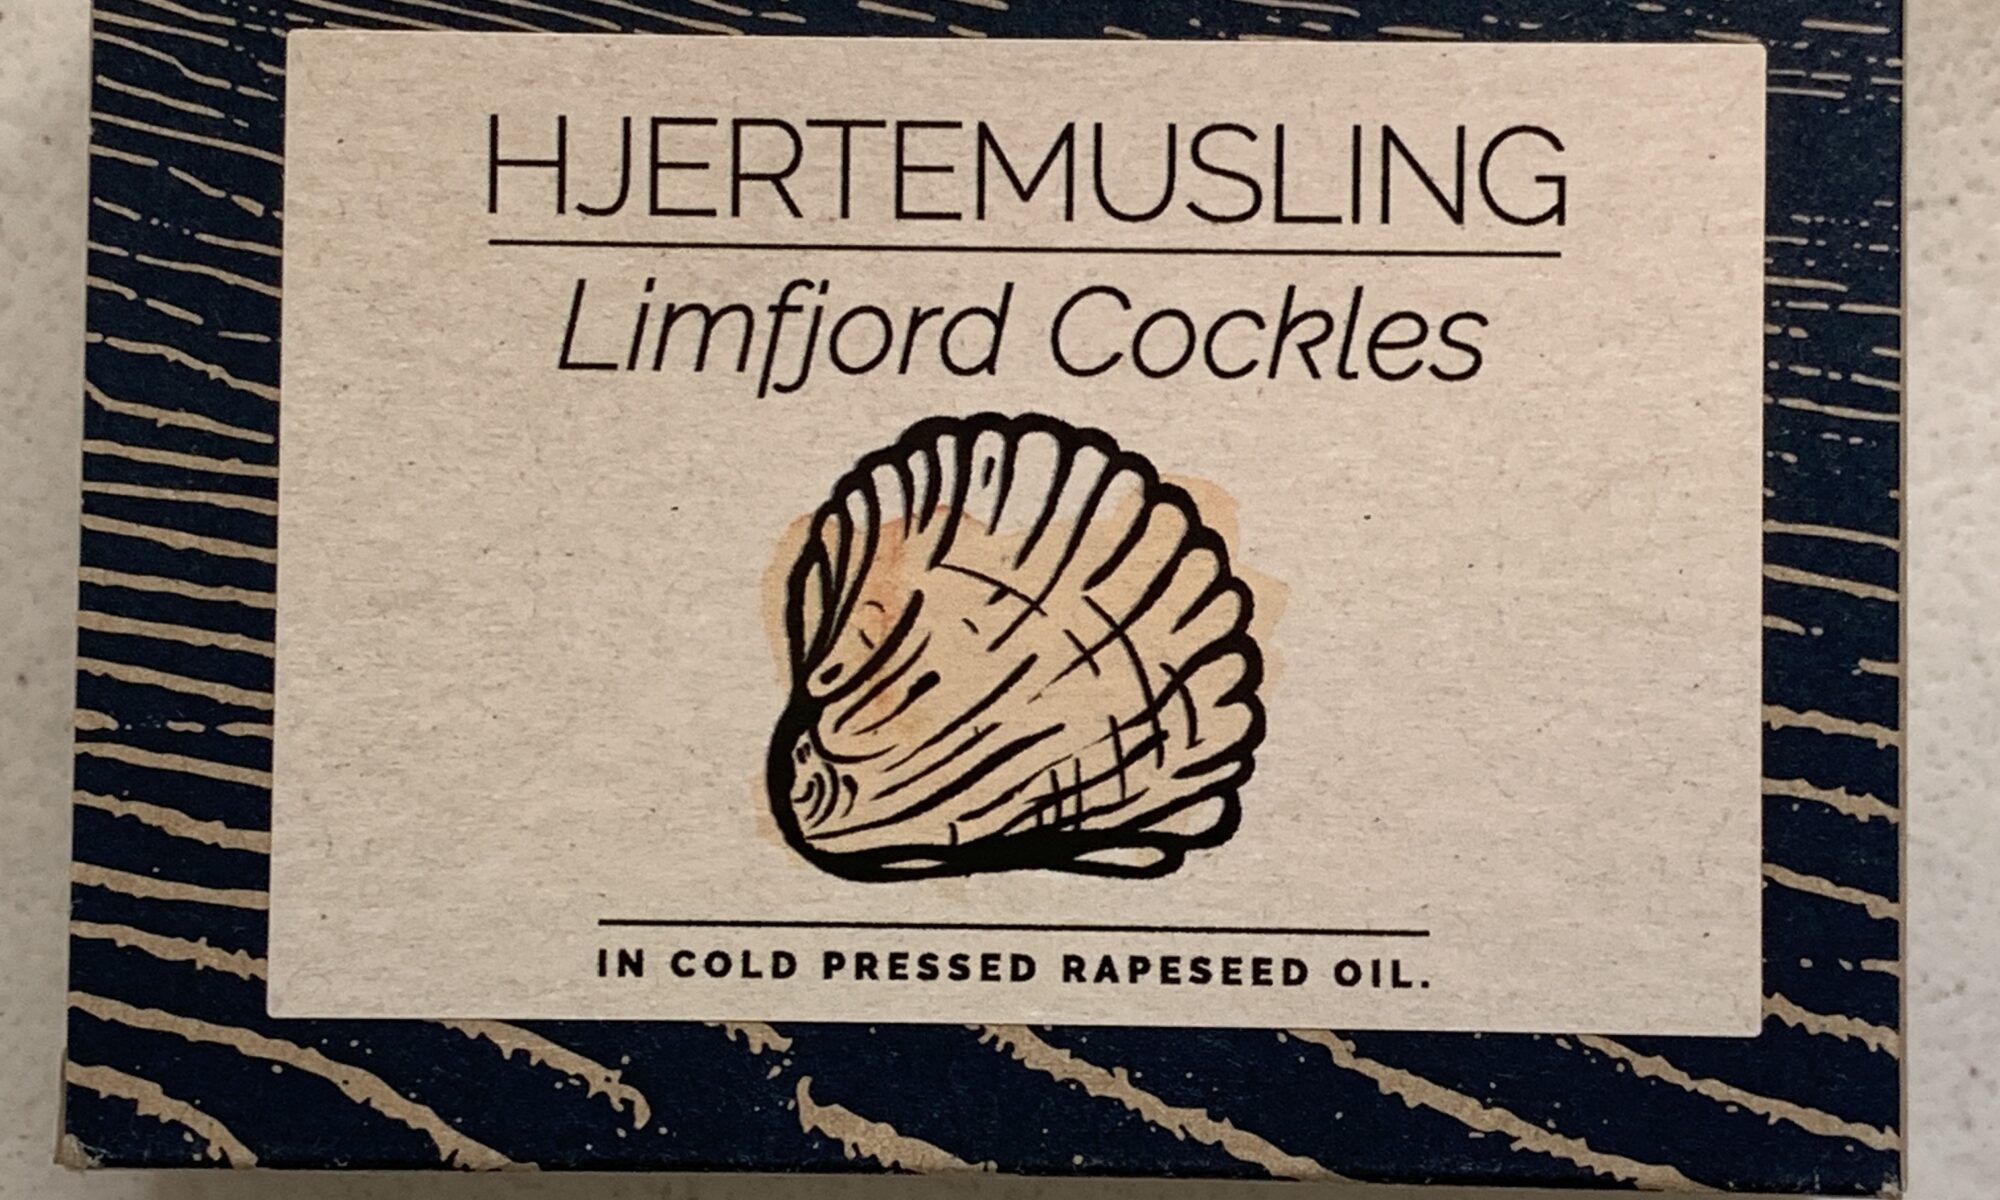 Image of the front of a package of Fangst Limfjord Hjertemusling (Cockles) in Cold Pressed Rapeseed (Canola) Oil